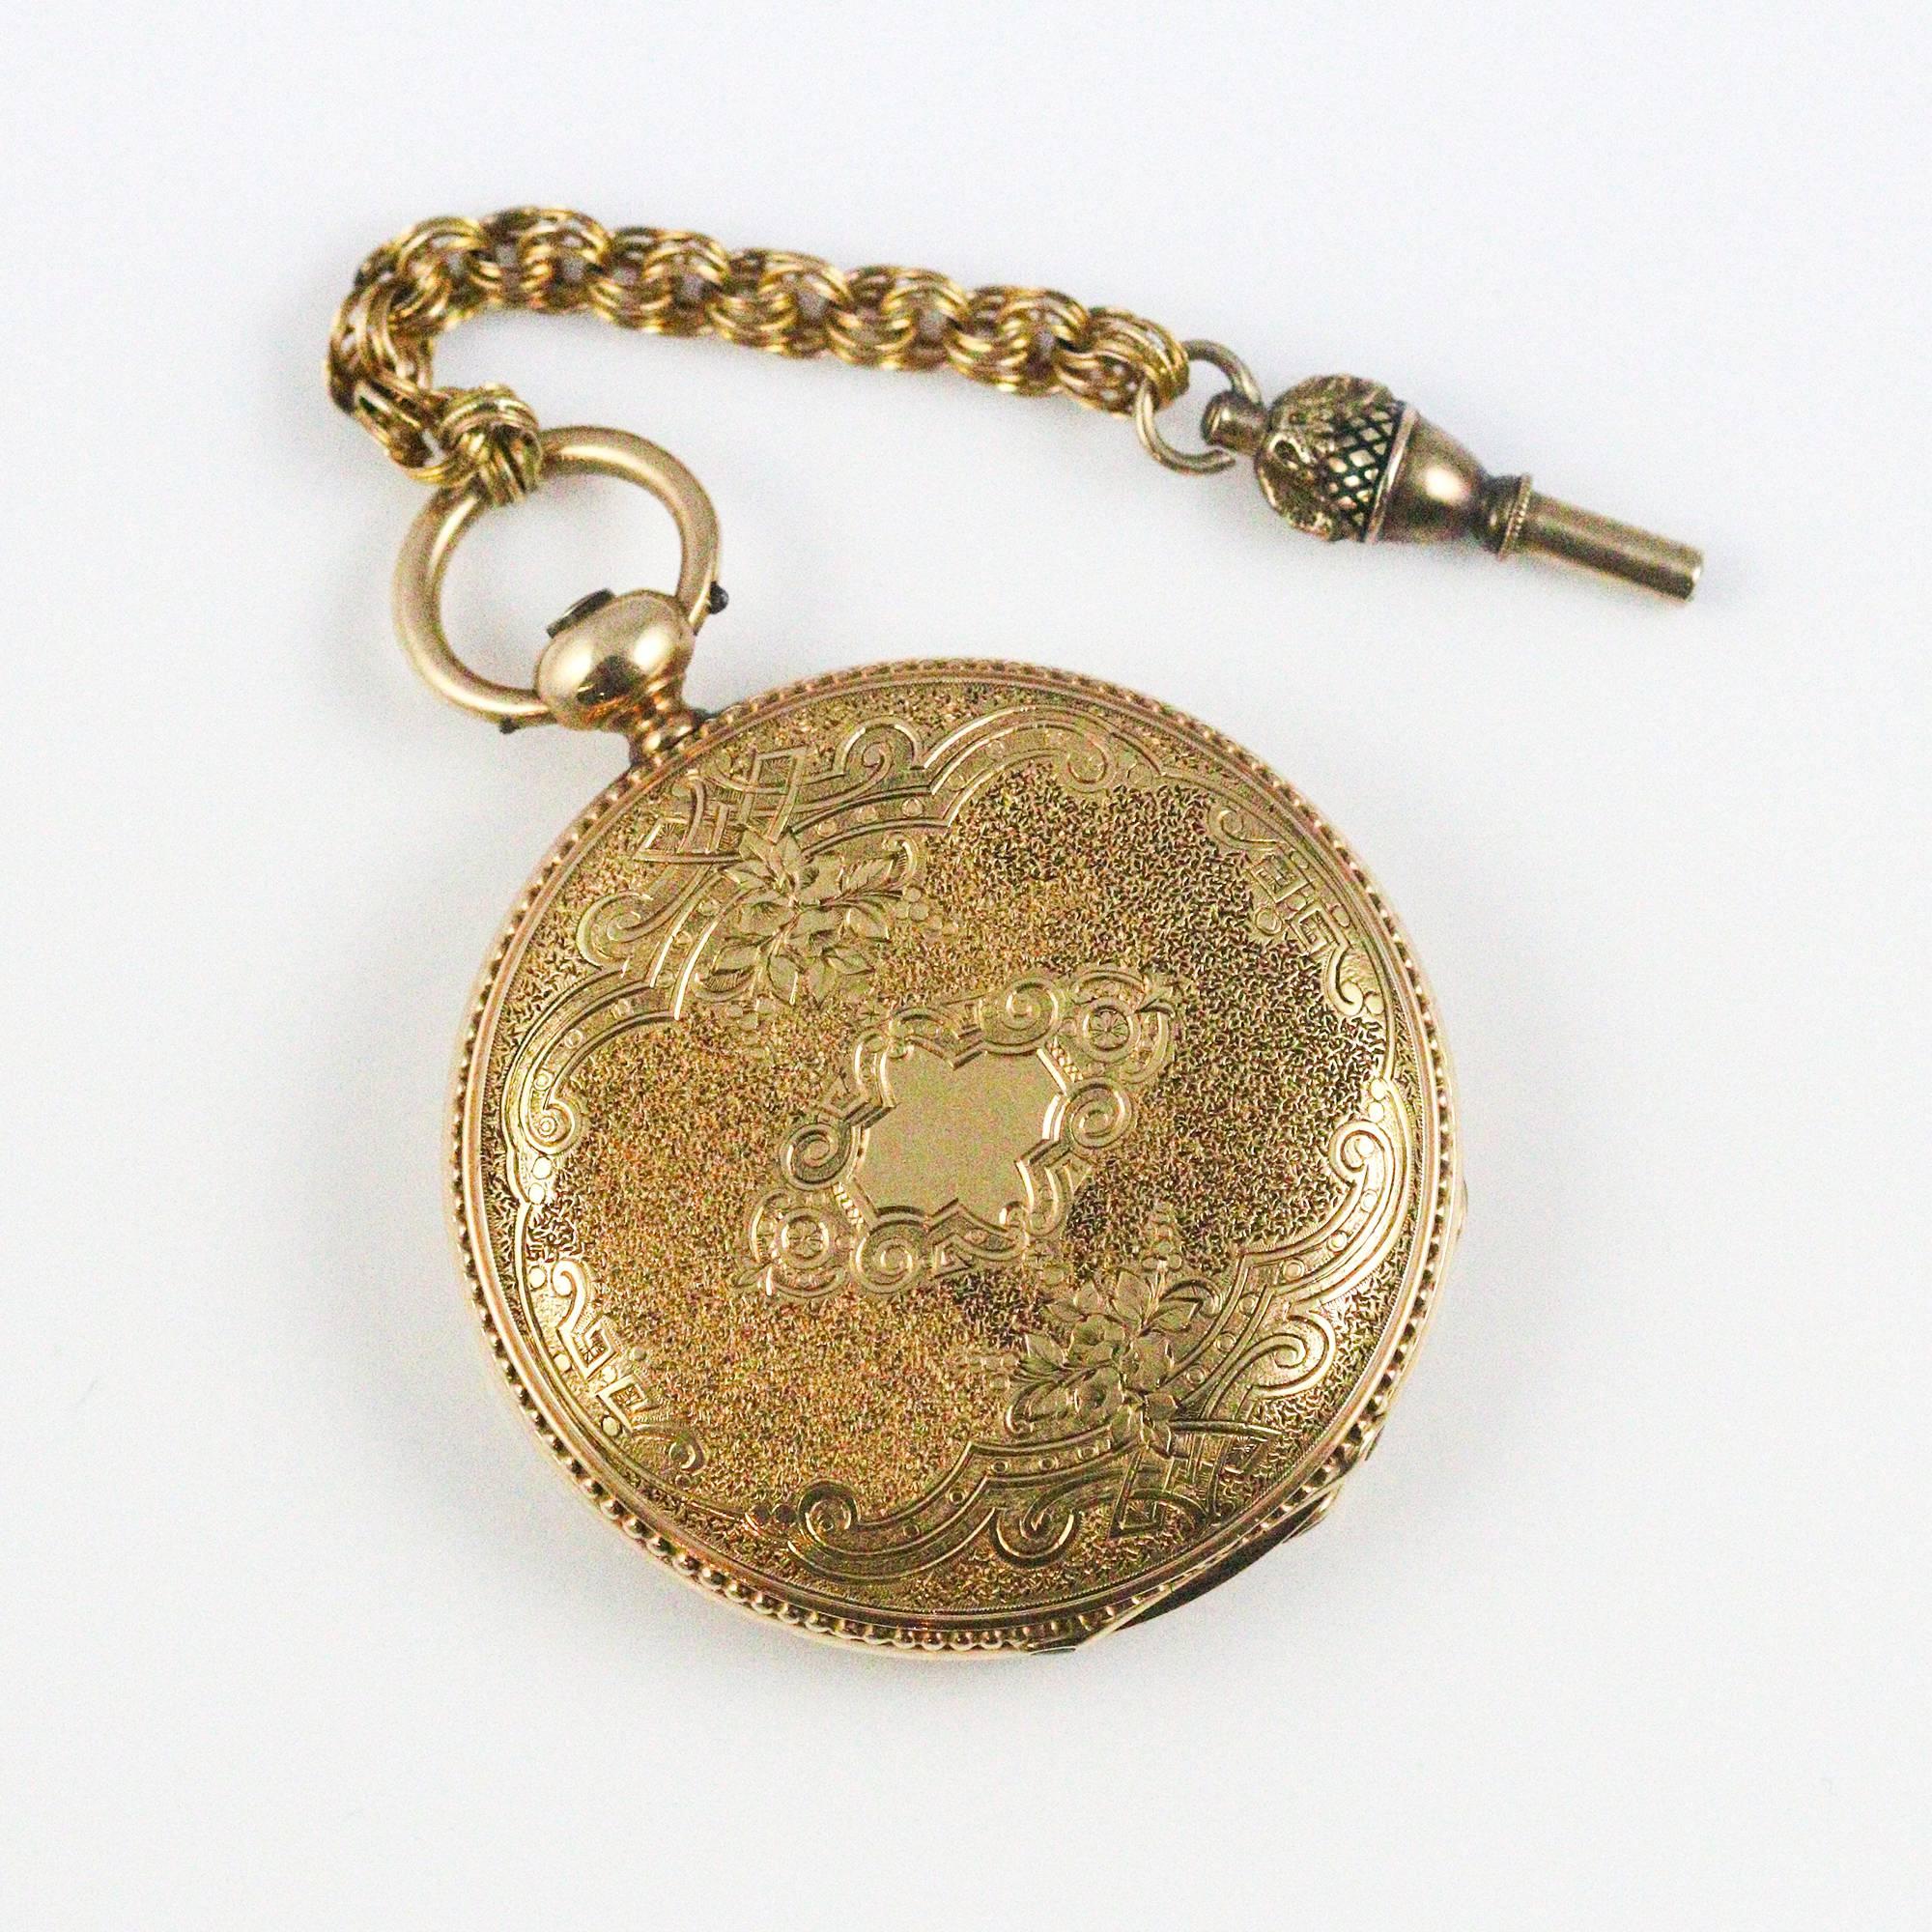 Women's or Men's Bautte & Co. Yellow Gold Mid-1800s Pocket Watch with Key